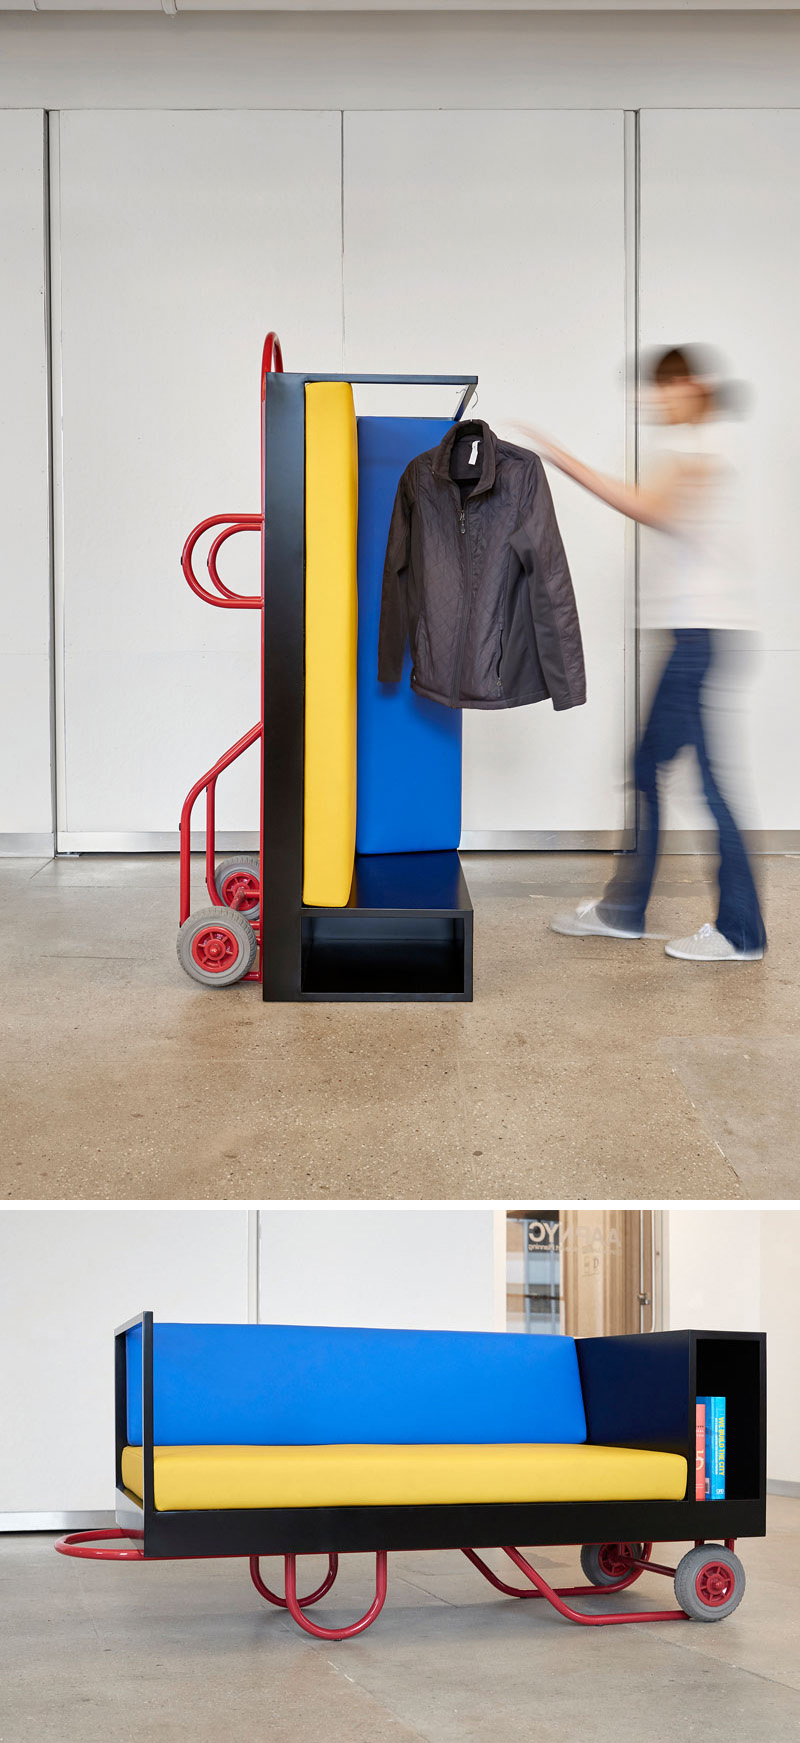 When not being used as a sofa this modern blue and yellow furniture piece can be stored vertically and used as a coat rack.